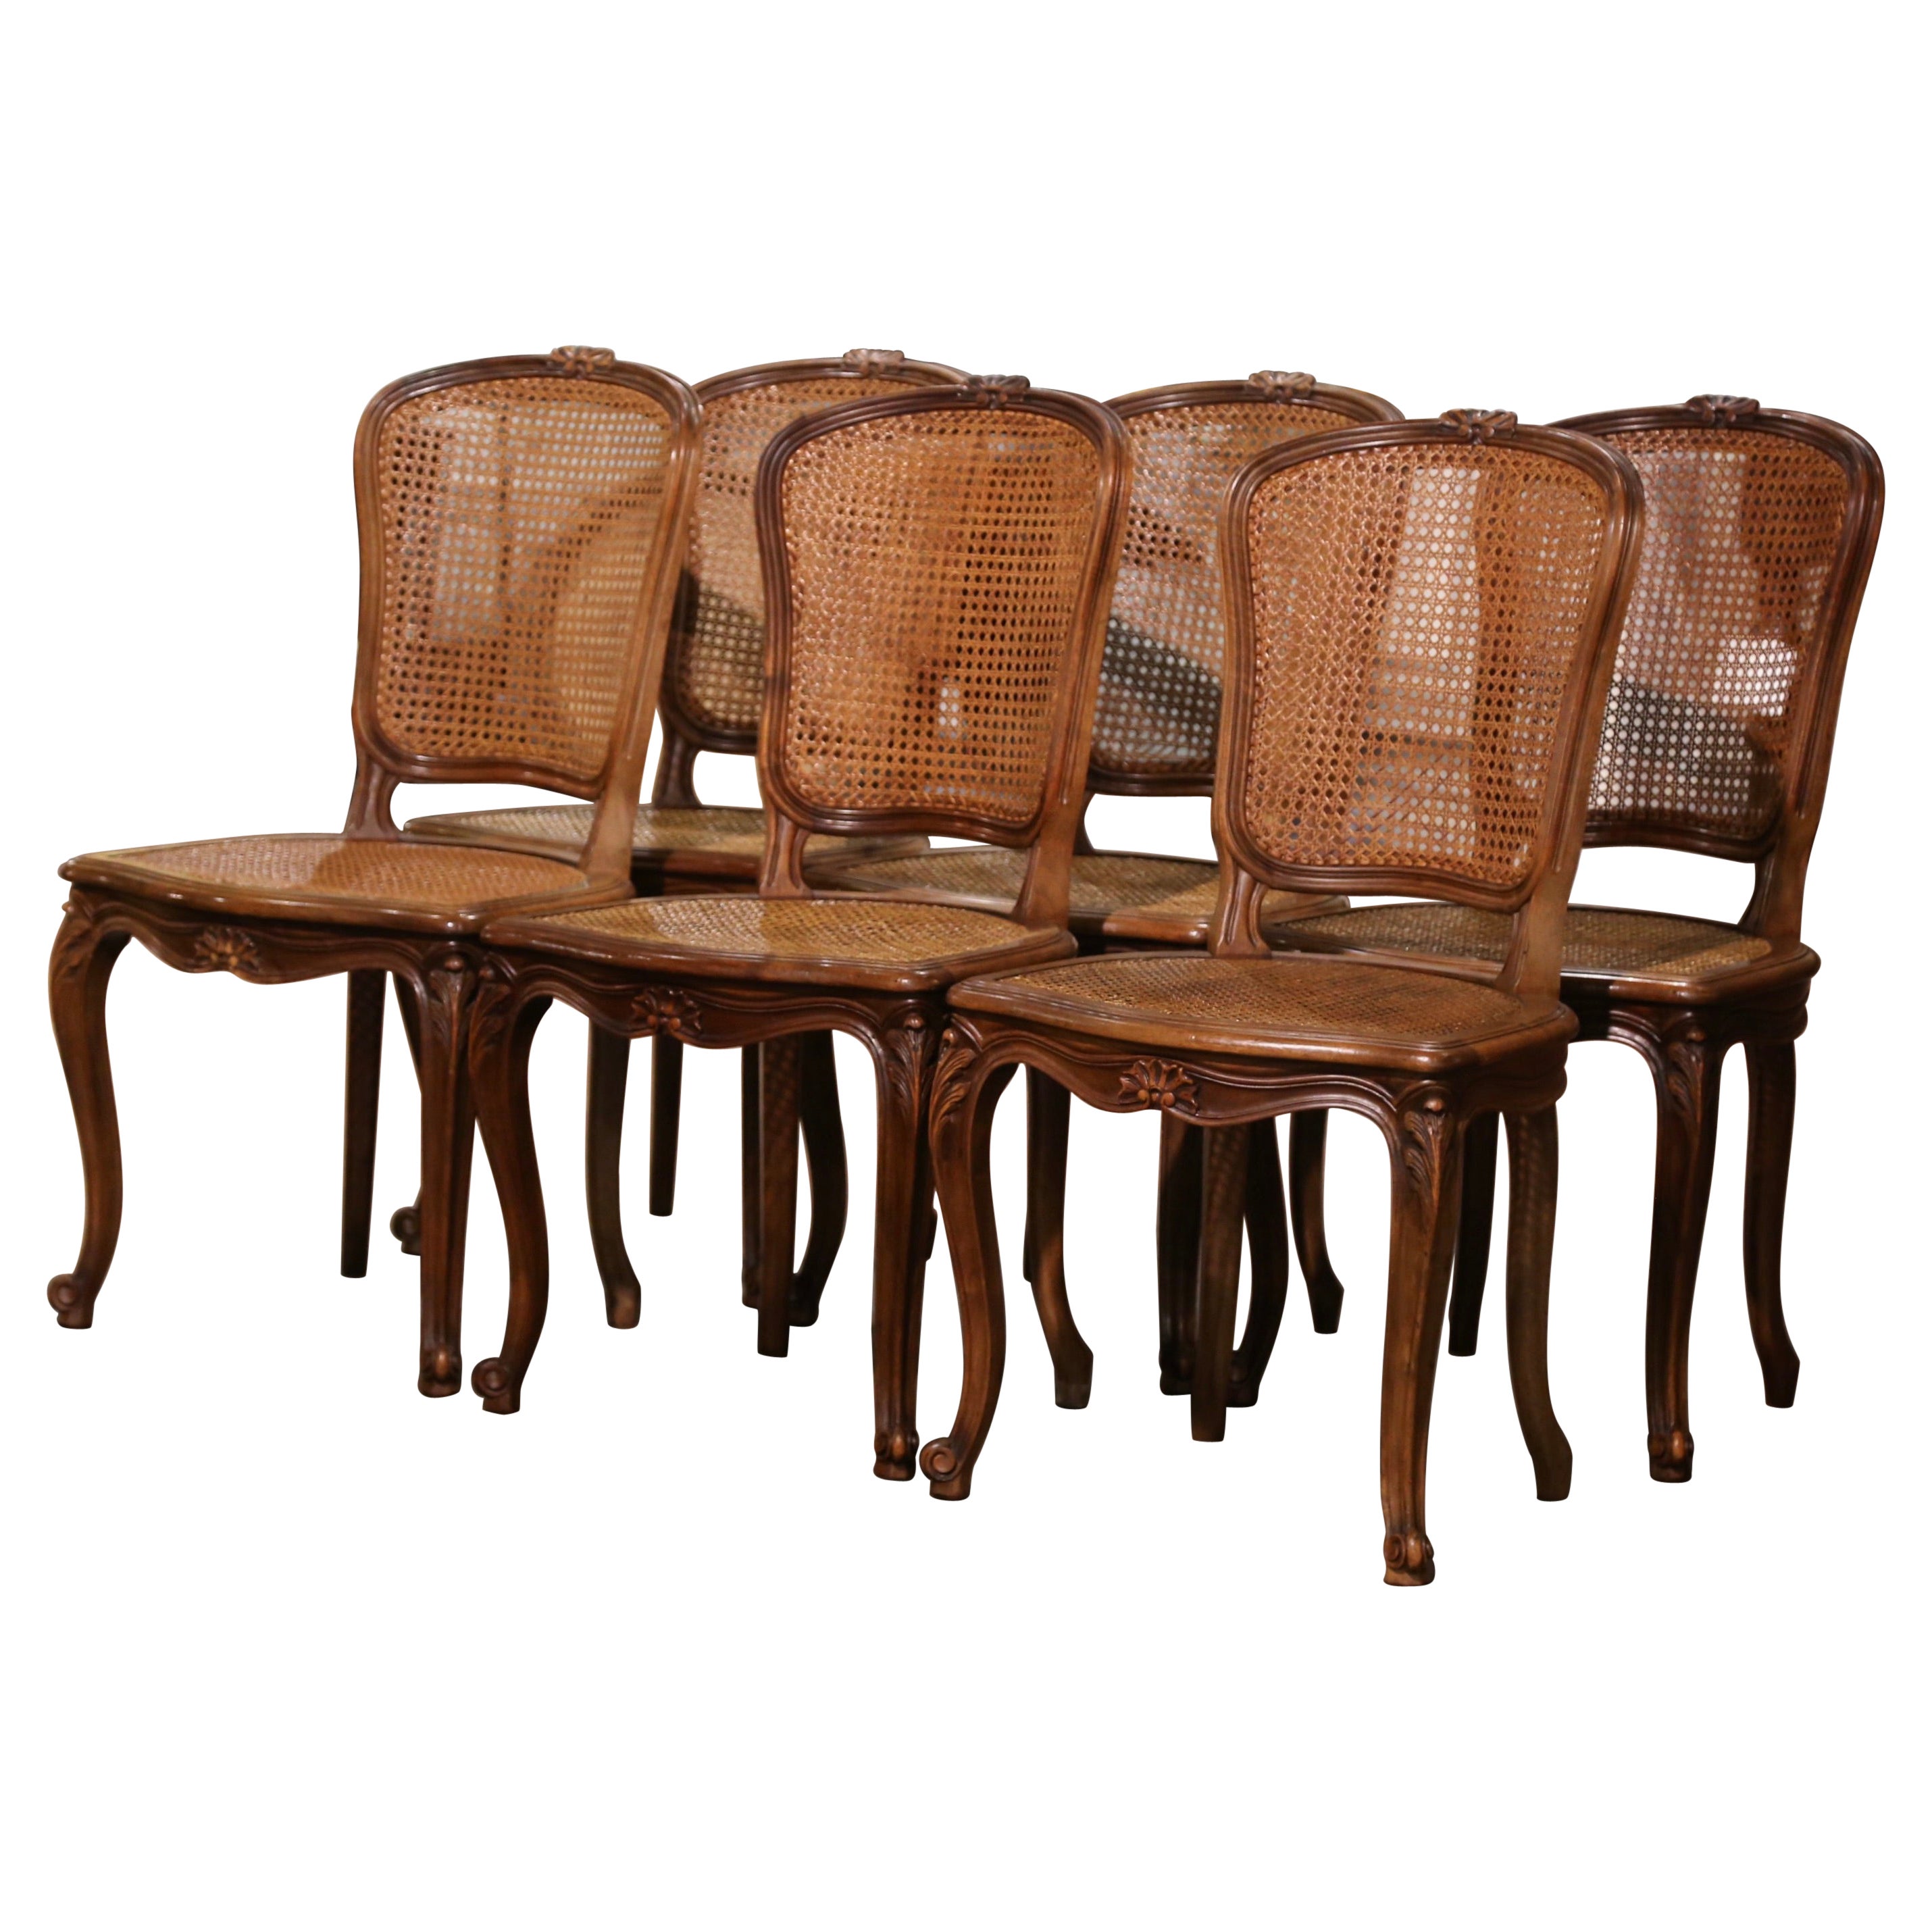 Early 20th Century French Louis XV Carved Walnut Cane Dining Chairs, Set of 6 For Sale